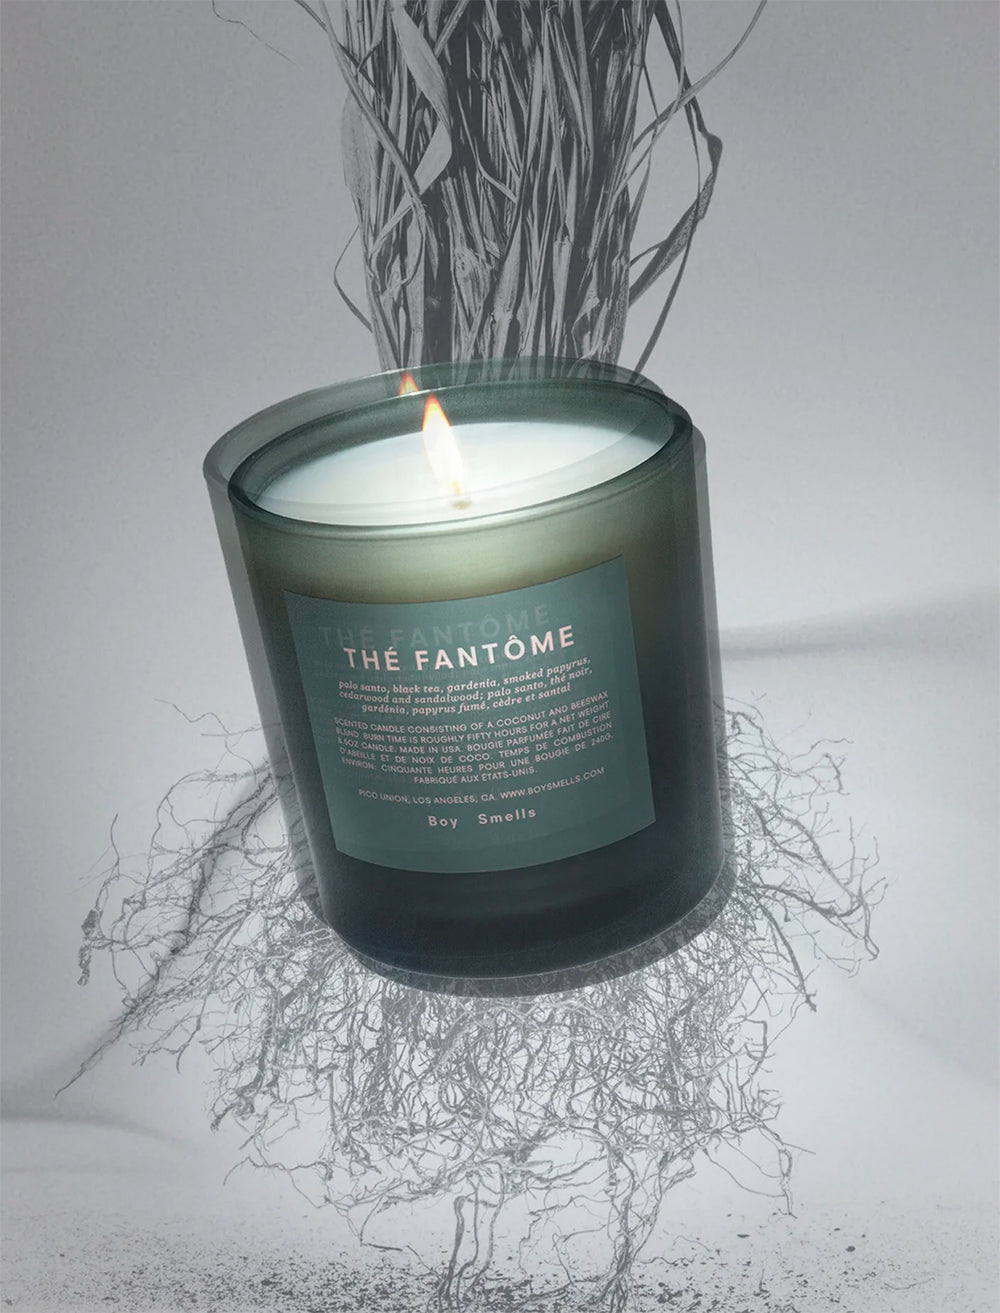 Marketing photo of Boy Smells' the fantome candle.